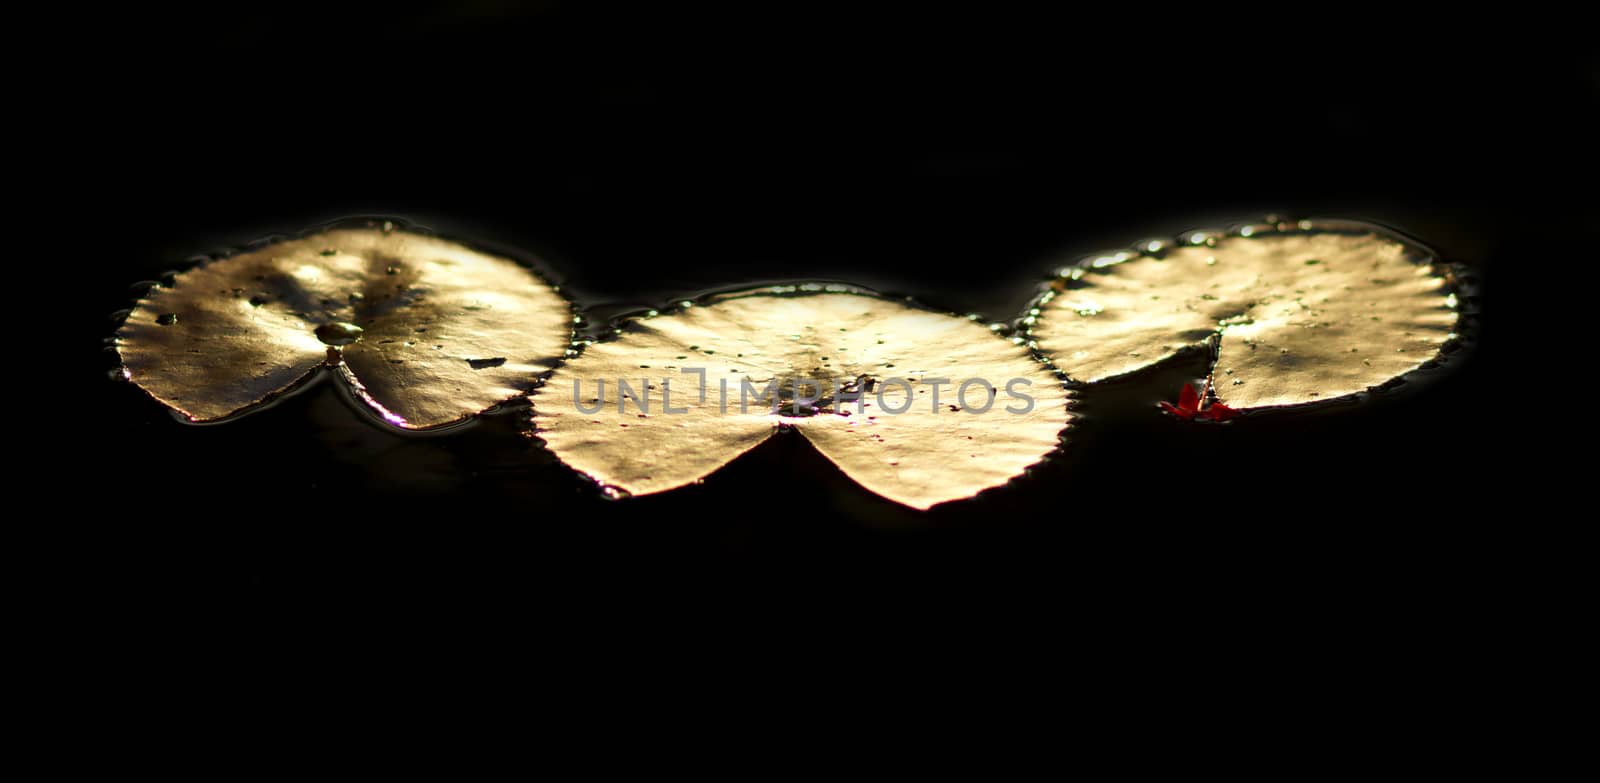 Reflection of the sunset on Lotus leaf